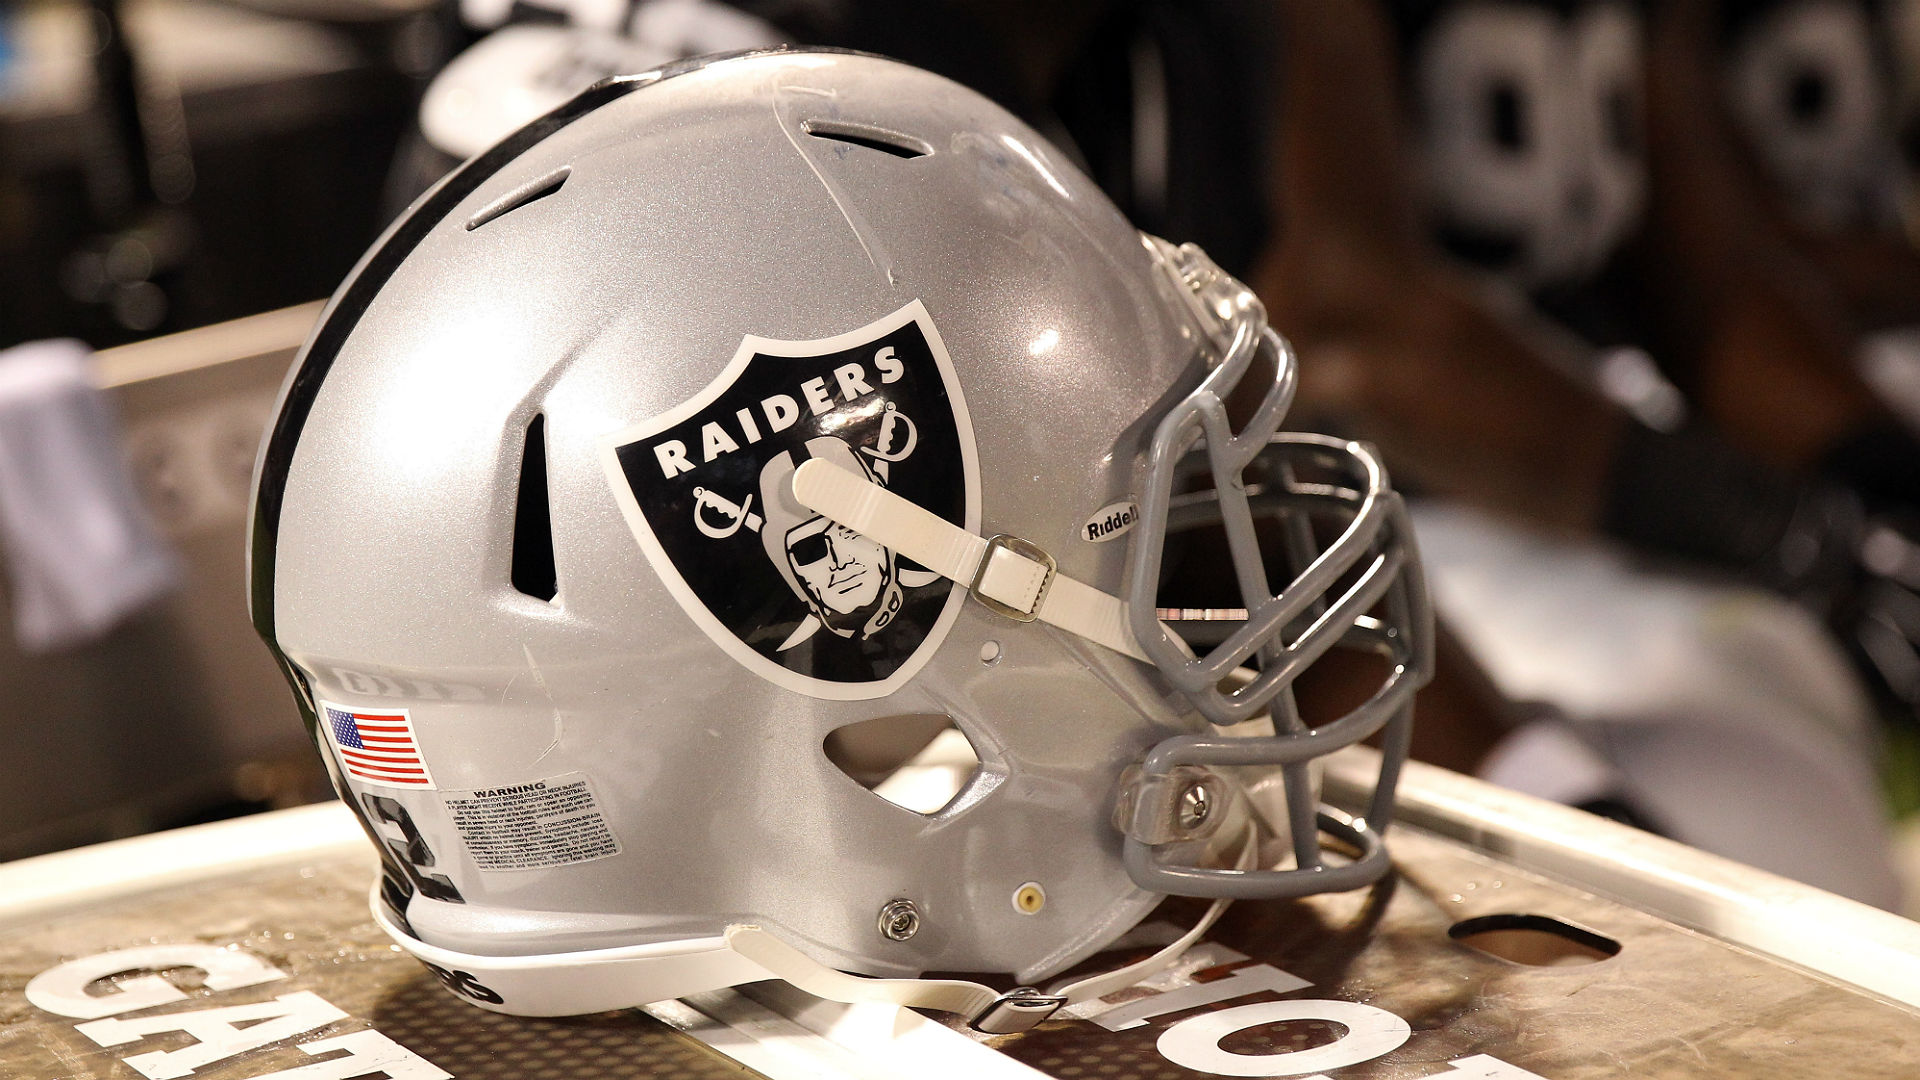 Raiders fined $20K for violating NFL's injury report policy, report says